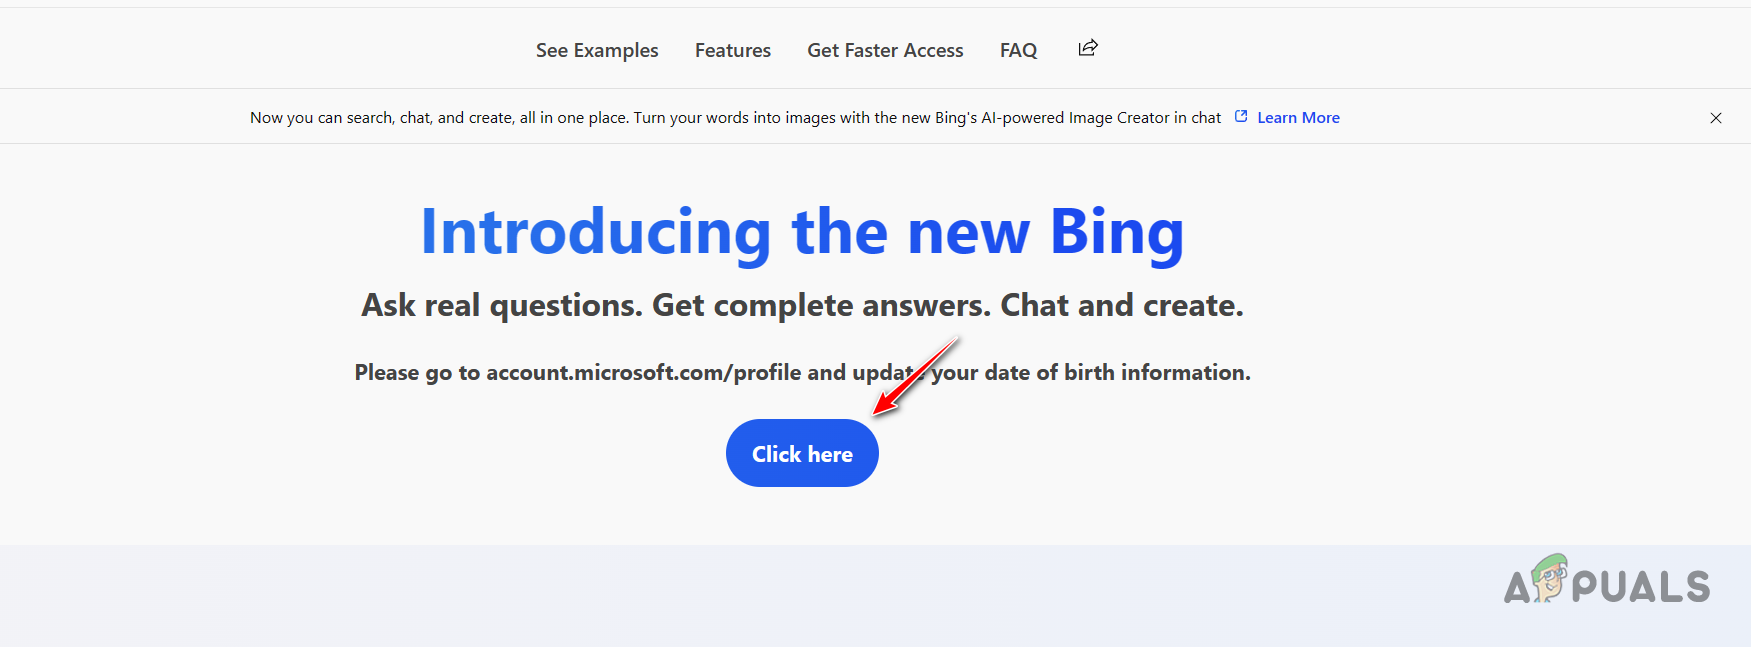 Bing Chat Update Date of Birth and Country